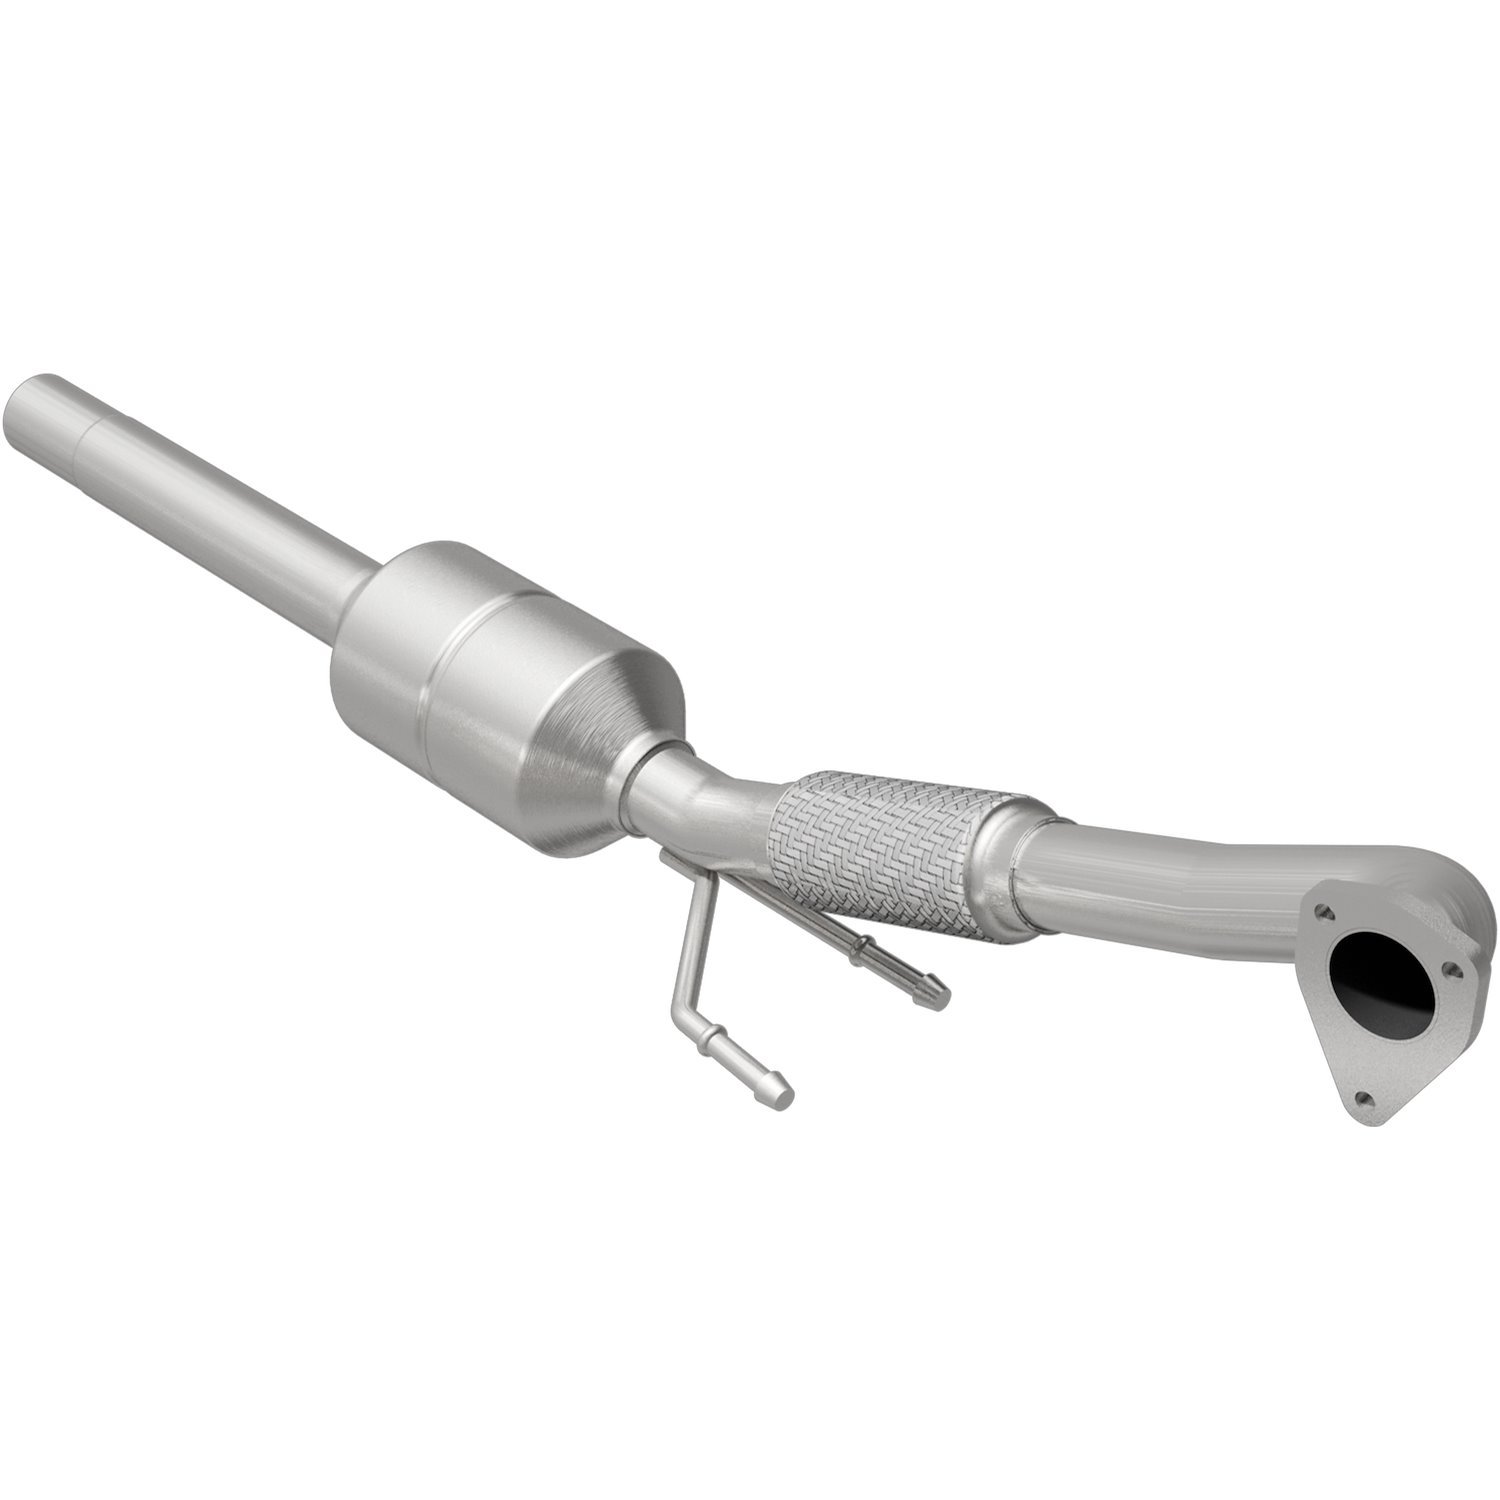 OEM Grade Federal / EPA Compliant Direct-Fit Catalytic Converter 52426